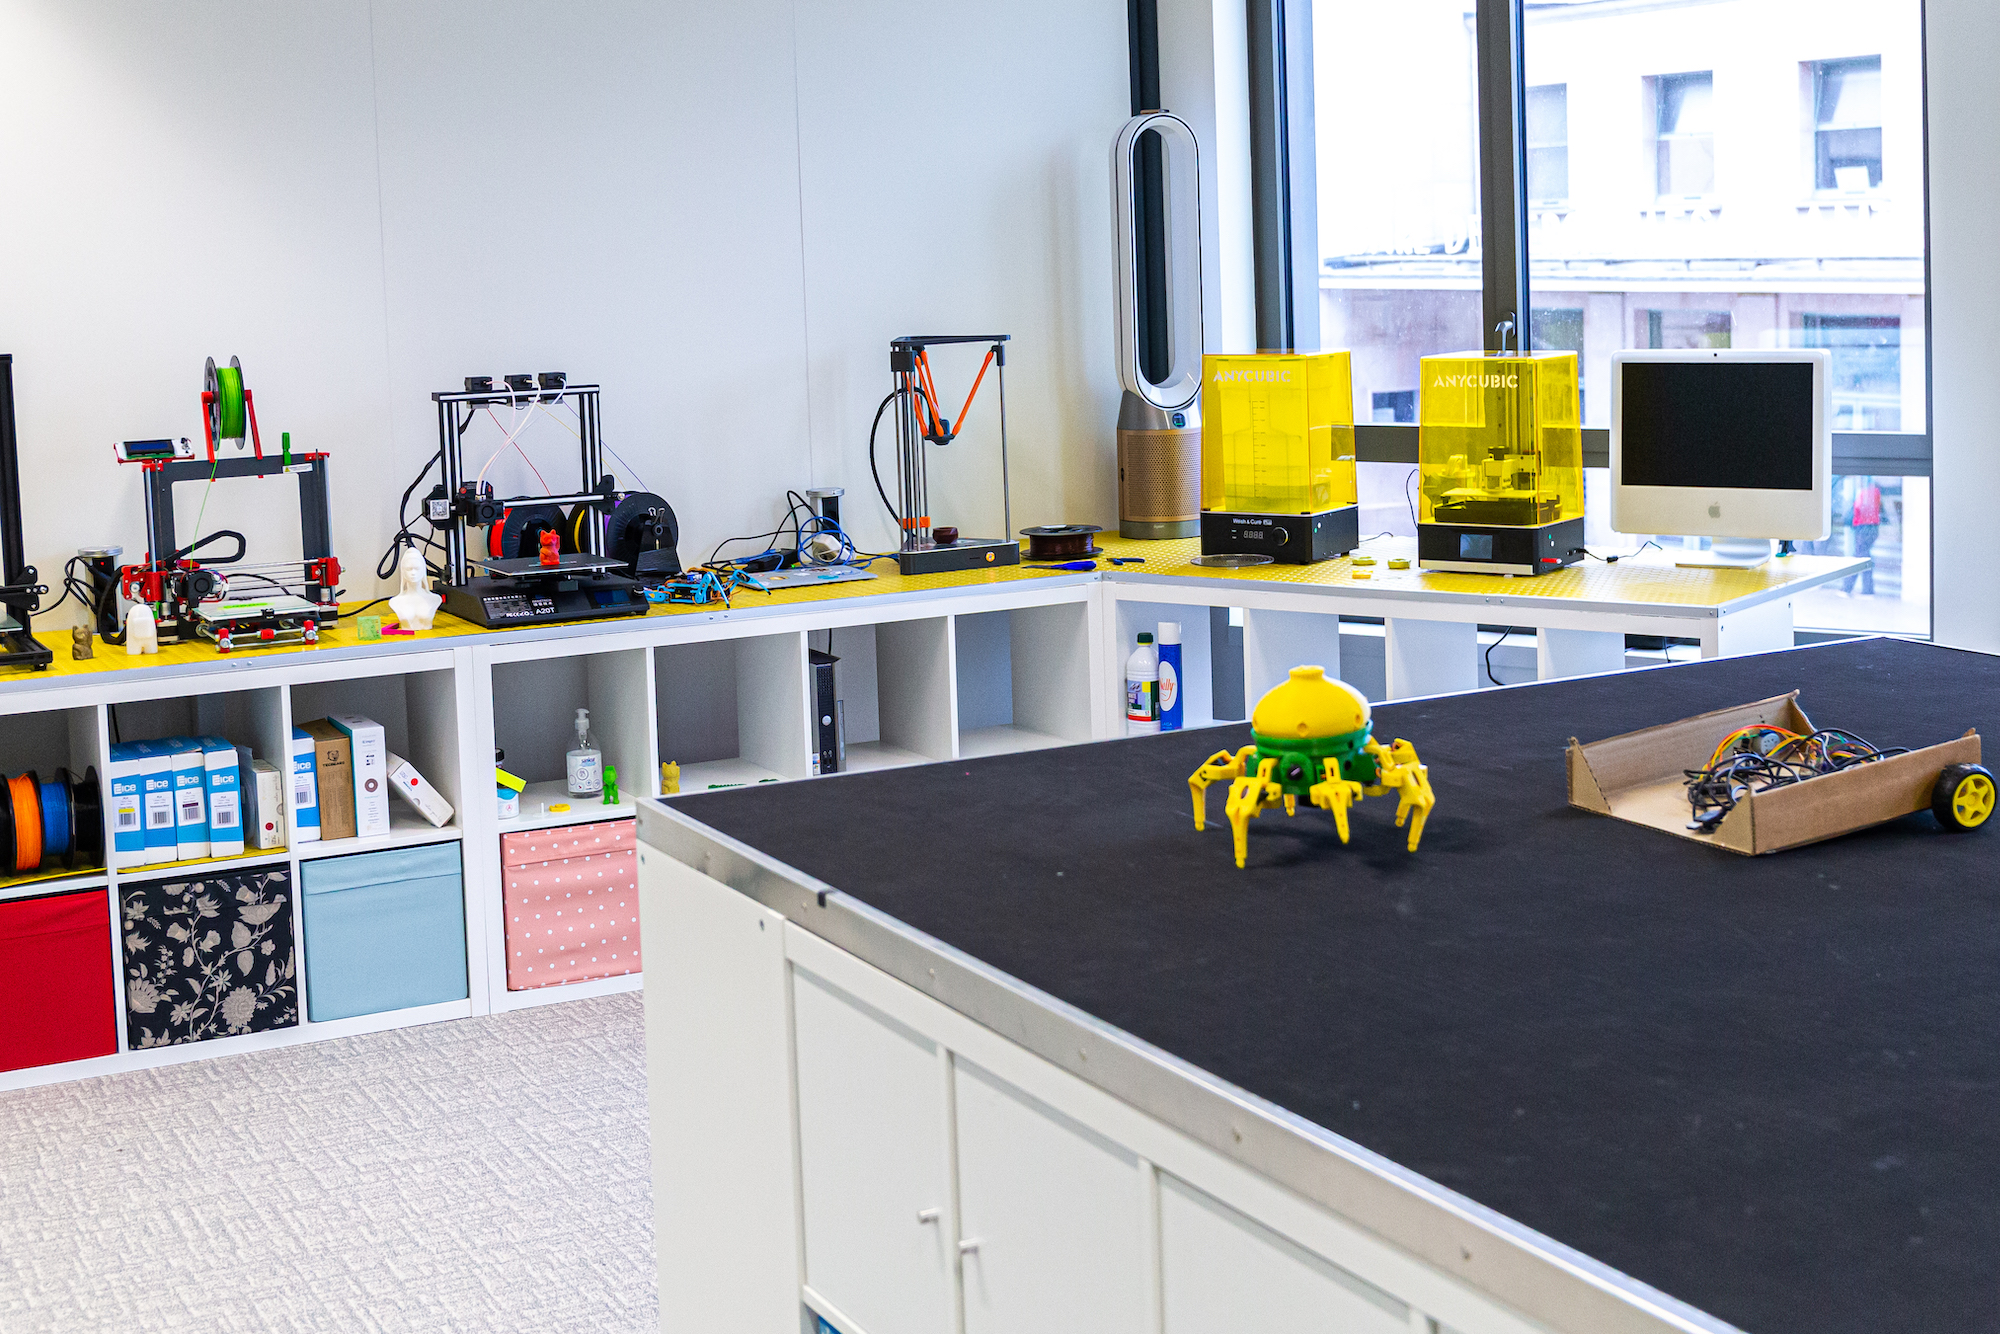 FabLab equipment with 3D printers